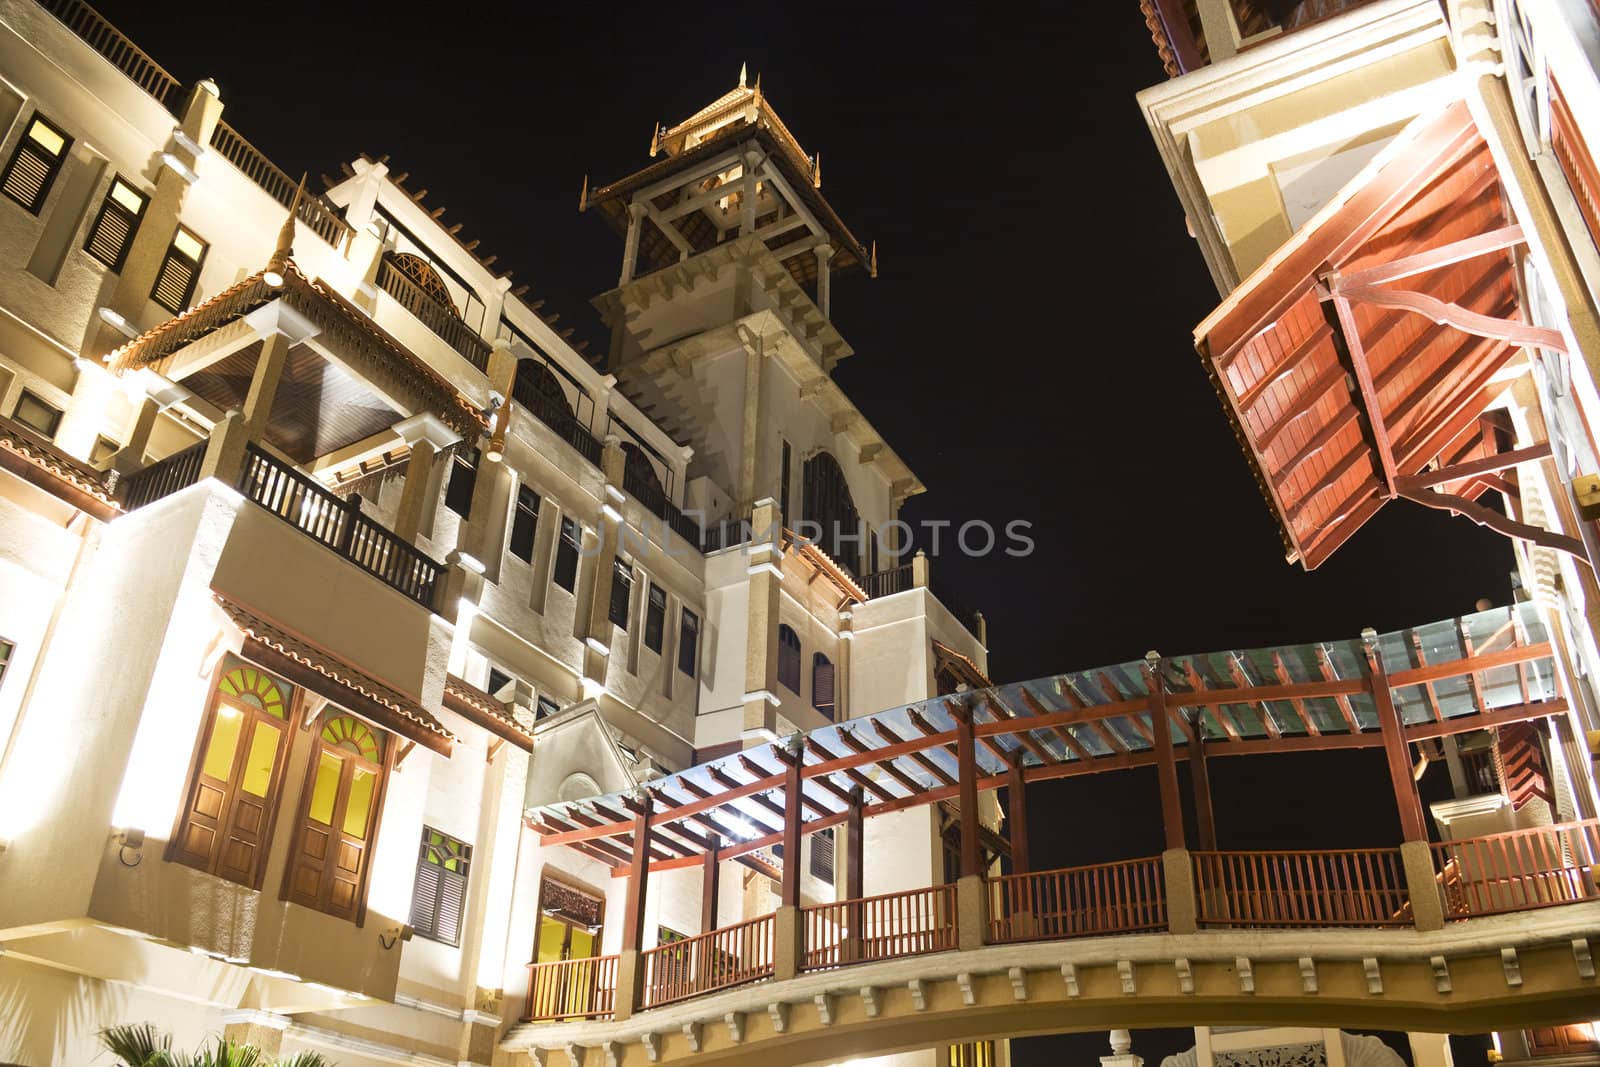 Traditional Malaysian Buildings at Night by shariffc